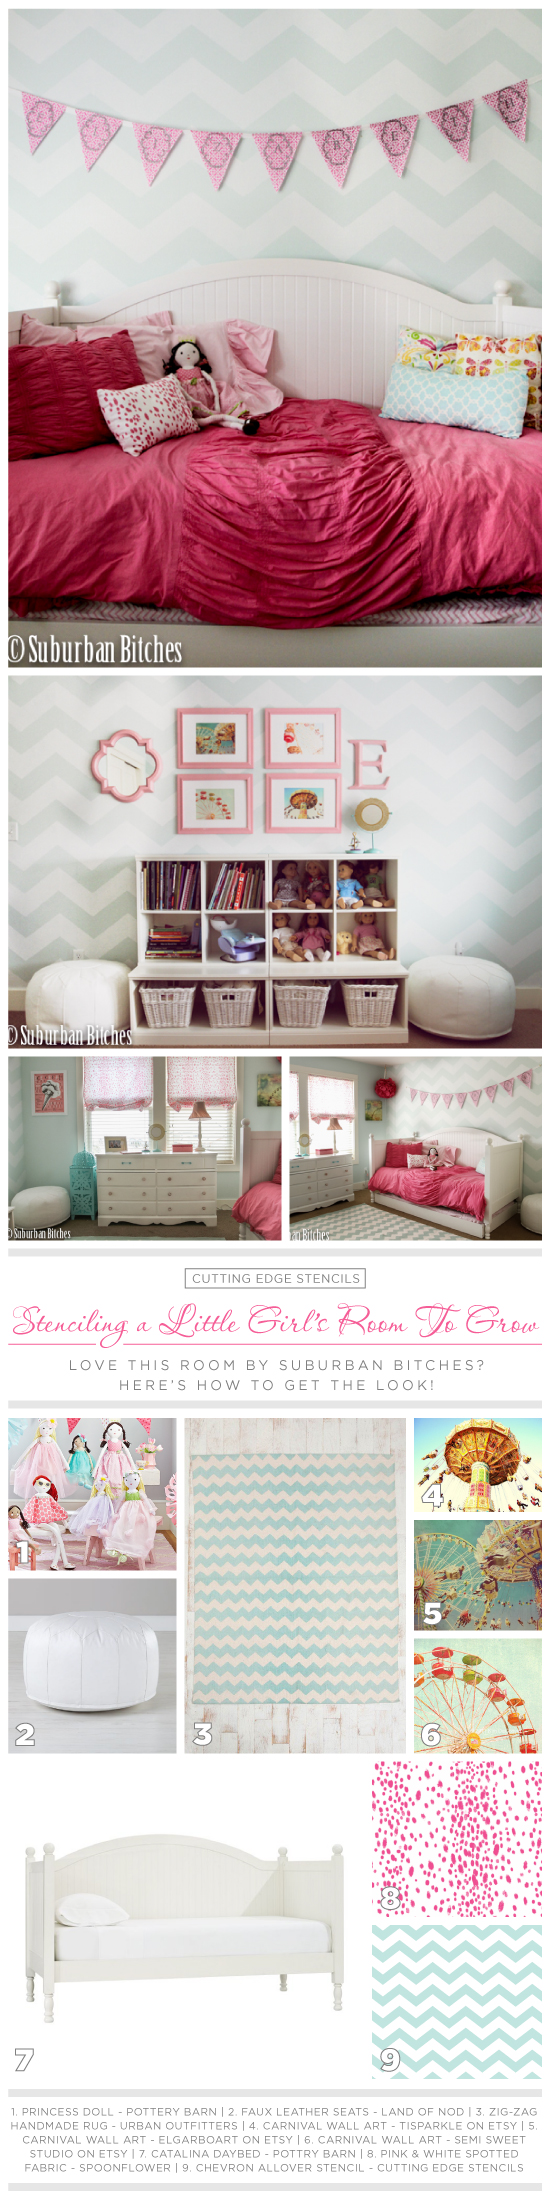 Steal the look of this Chevron Allover stenciled little girl's room. http://www.cuttingedgestencils.com/chevron-stencil-pattern.html